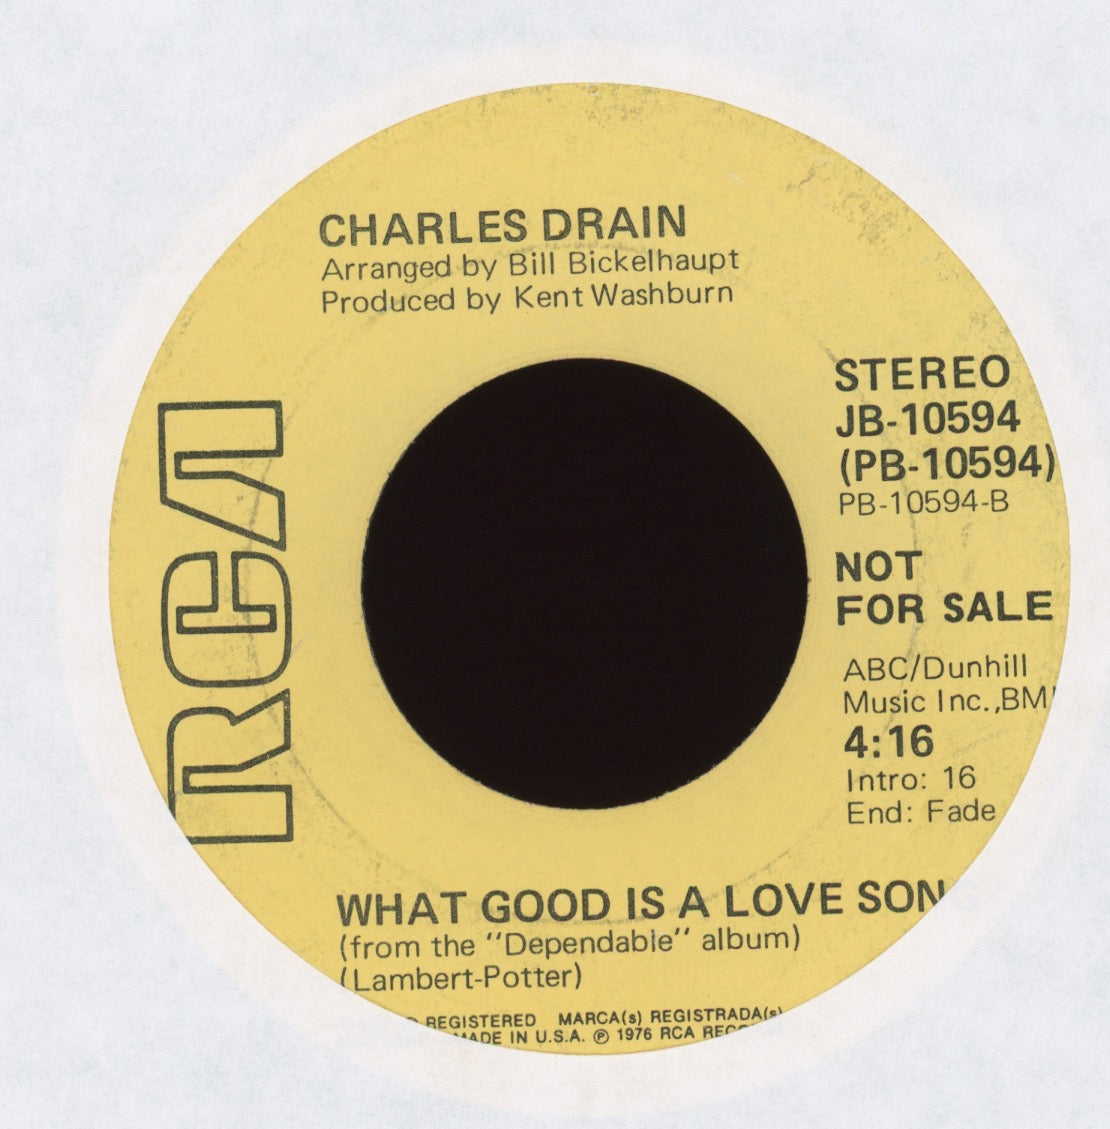 Charles Drain - I'm Gonna Stay on RCA Promo